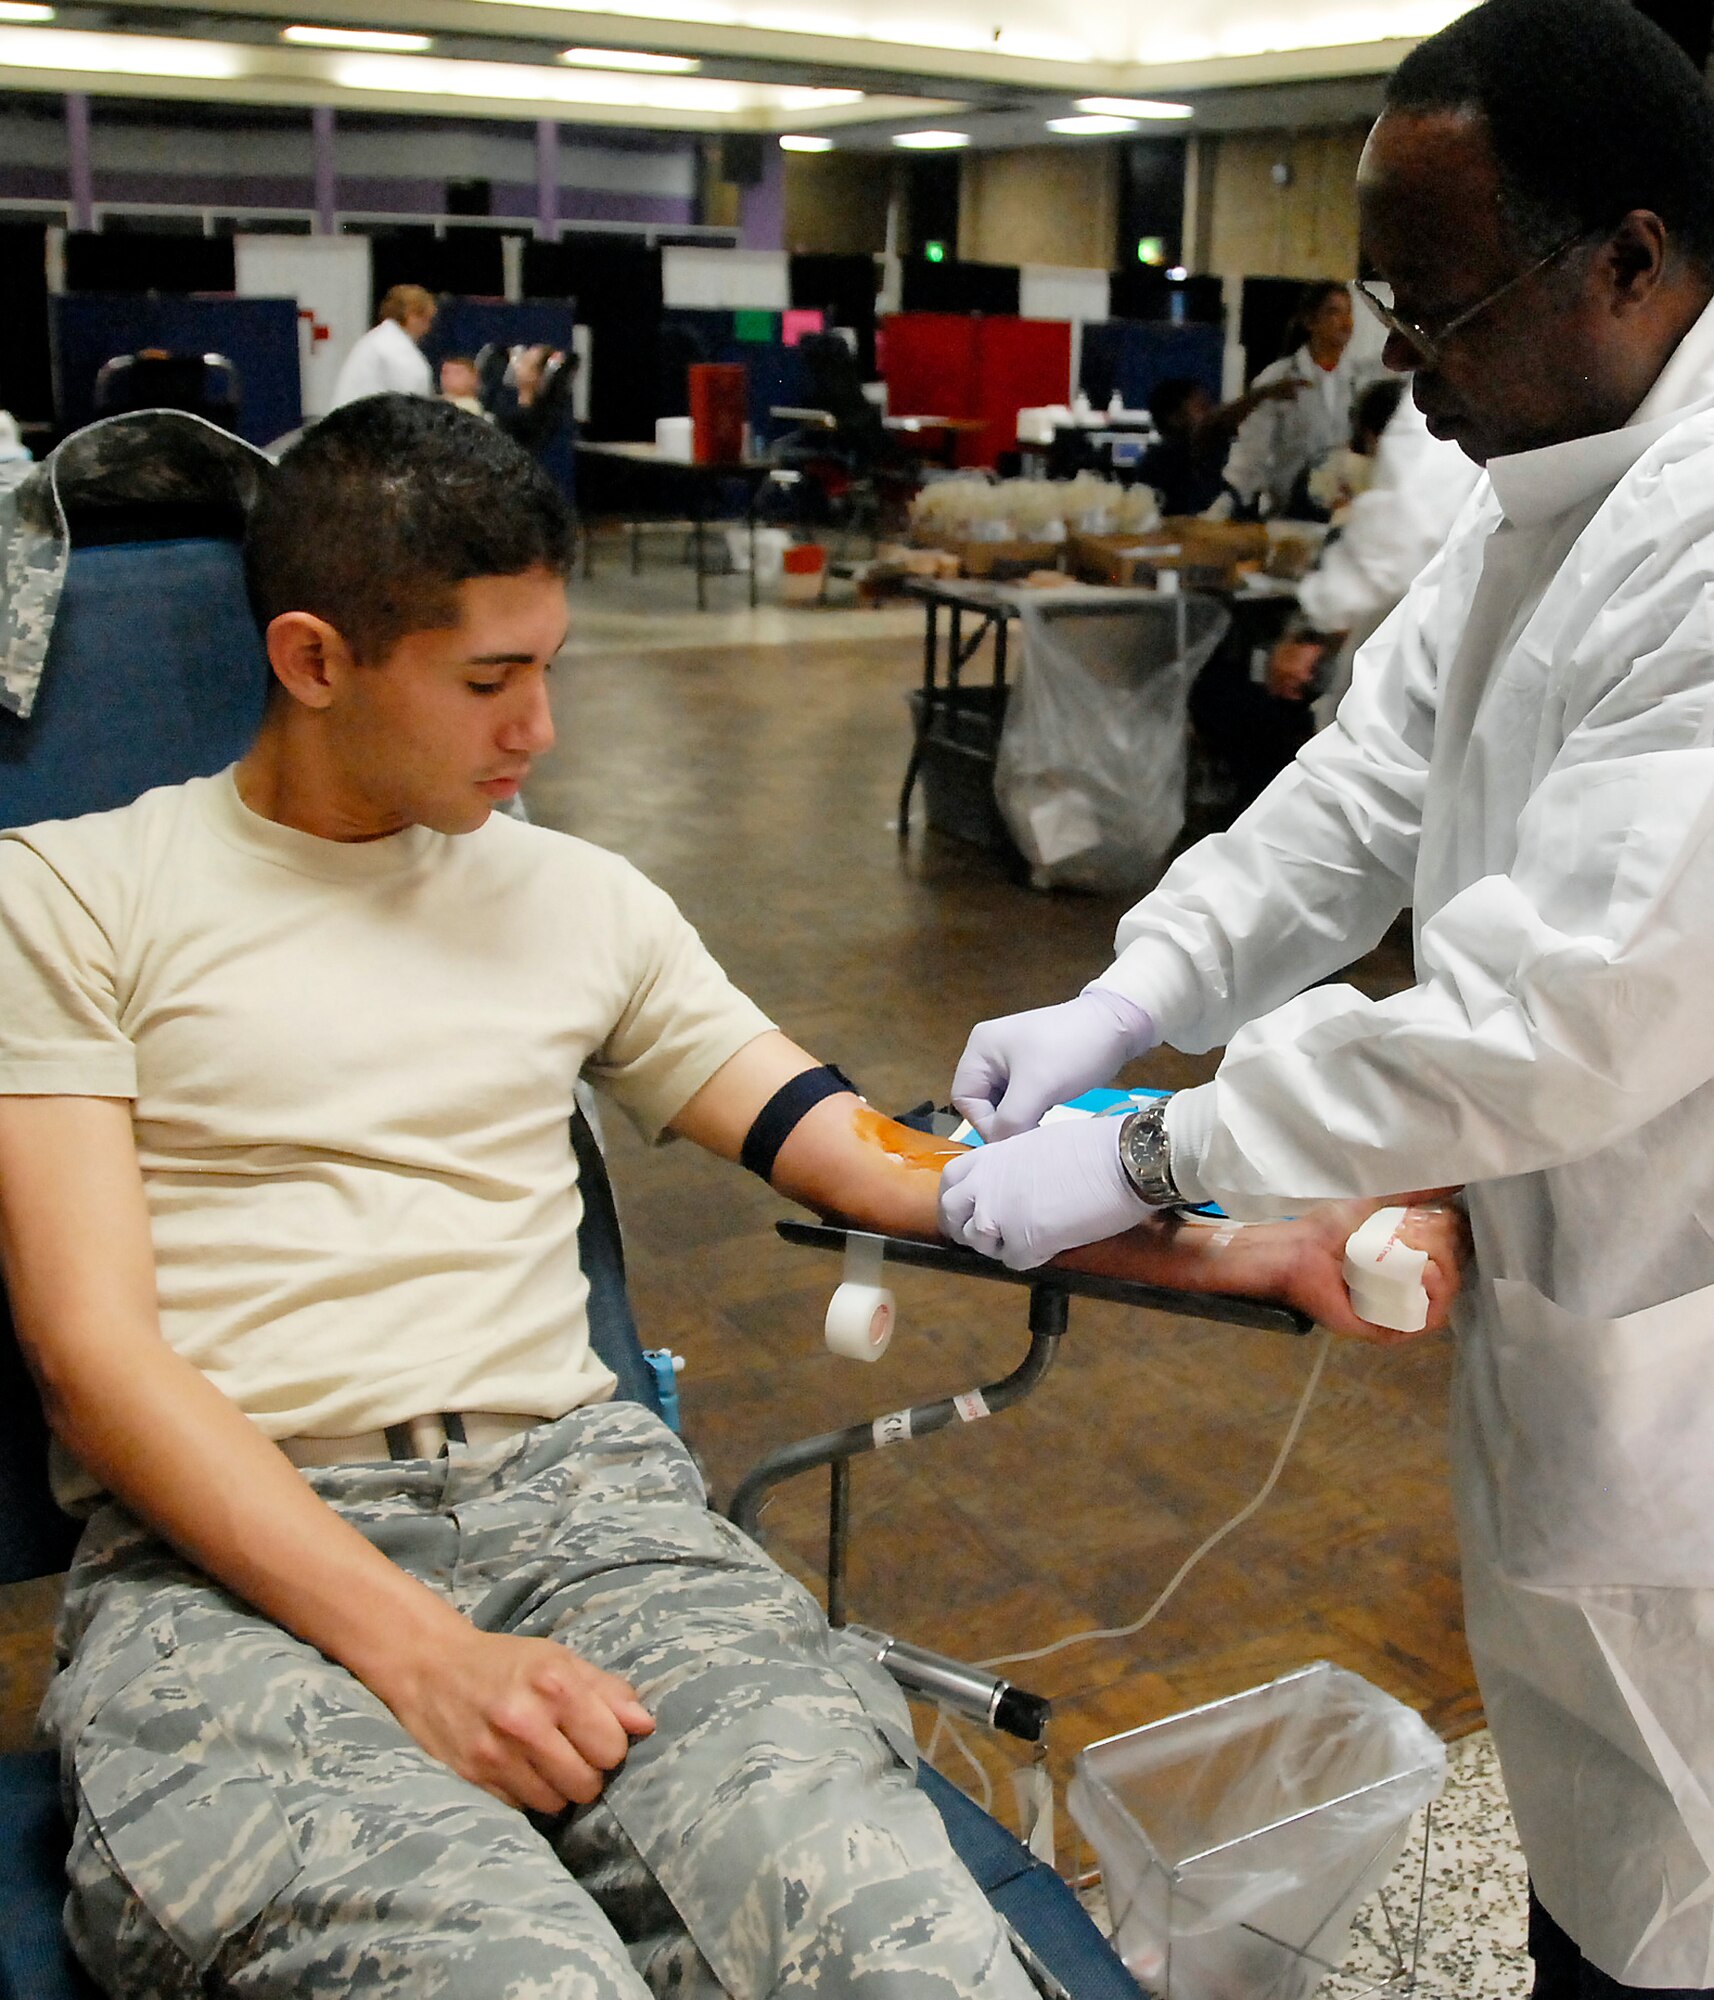 Airman 1st Class Juan Carlos, an Airman in Training, gives blood at the American Red Cross Blood Drive Sept. 22 at the Airman’s Club. He has given blood more than 20 times. This blood drive was geared to break a state blood donation record. (U.S. Air Force photo/ Mike Litteken)